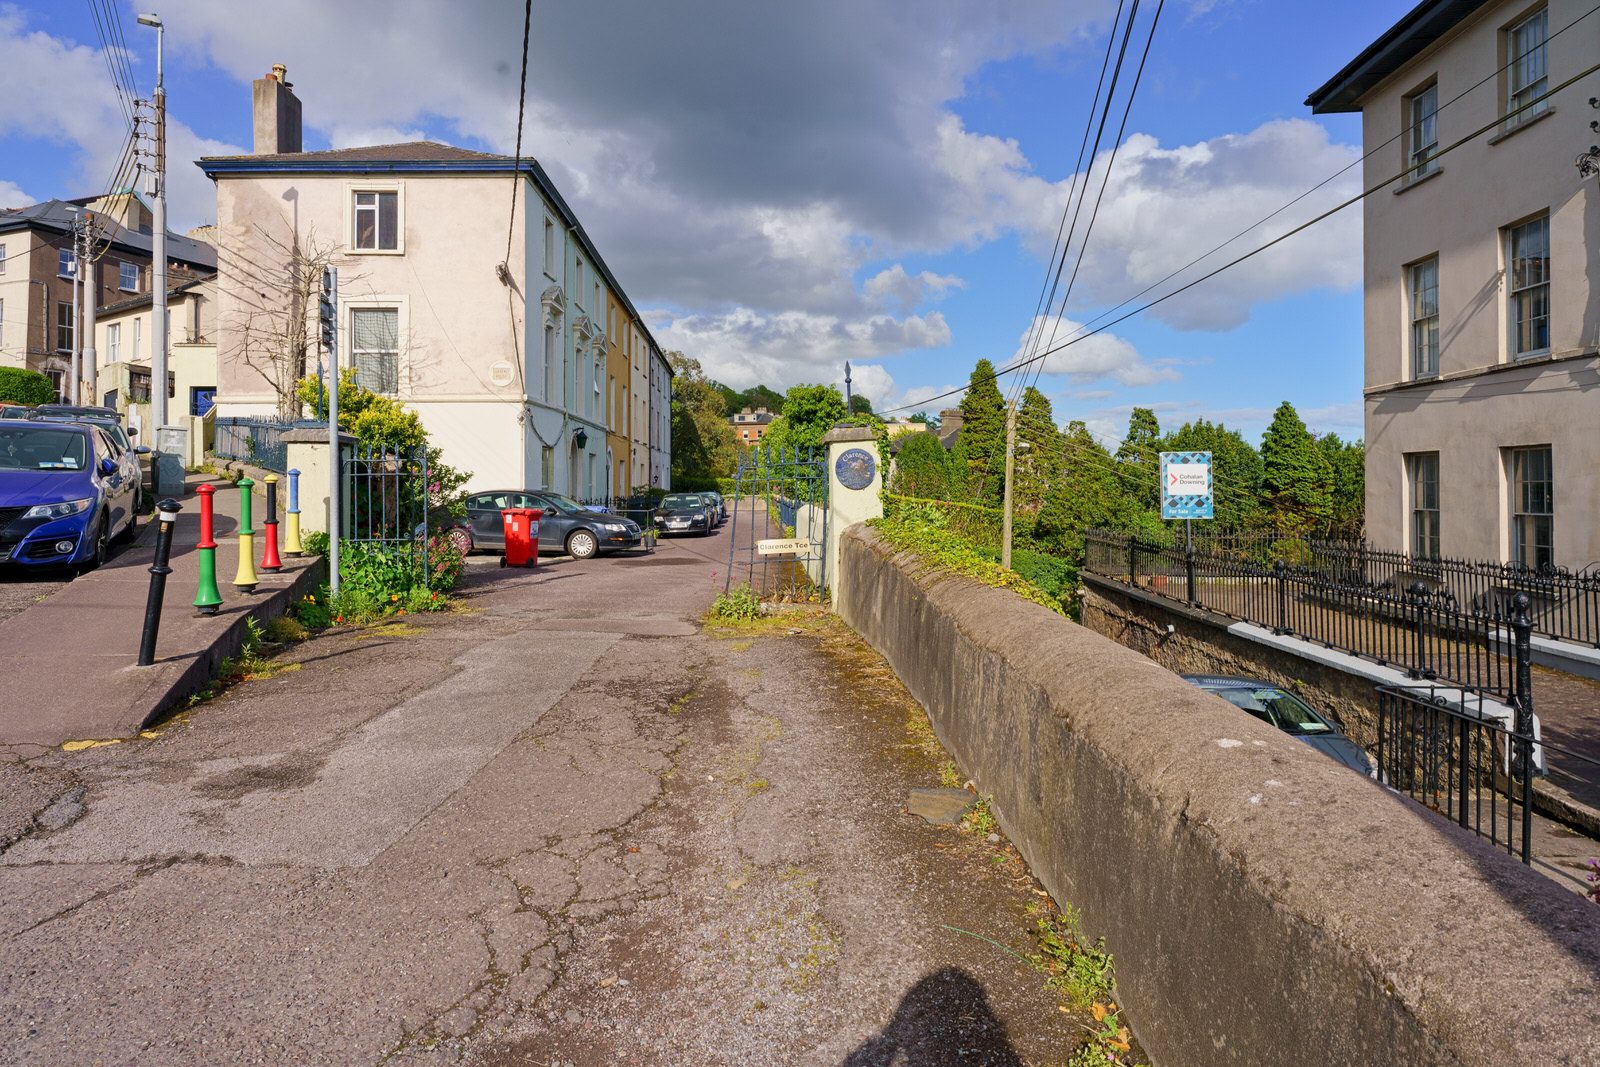 A WALK ALONG SUMMERHILL NORTH [IN CORK EVERYWHERE IS UPHILL OR DOWNHILL]-225828-1